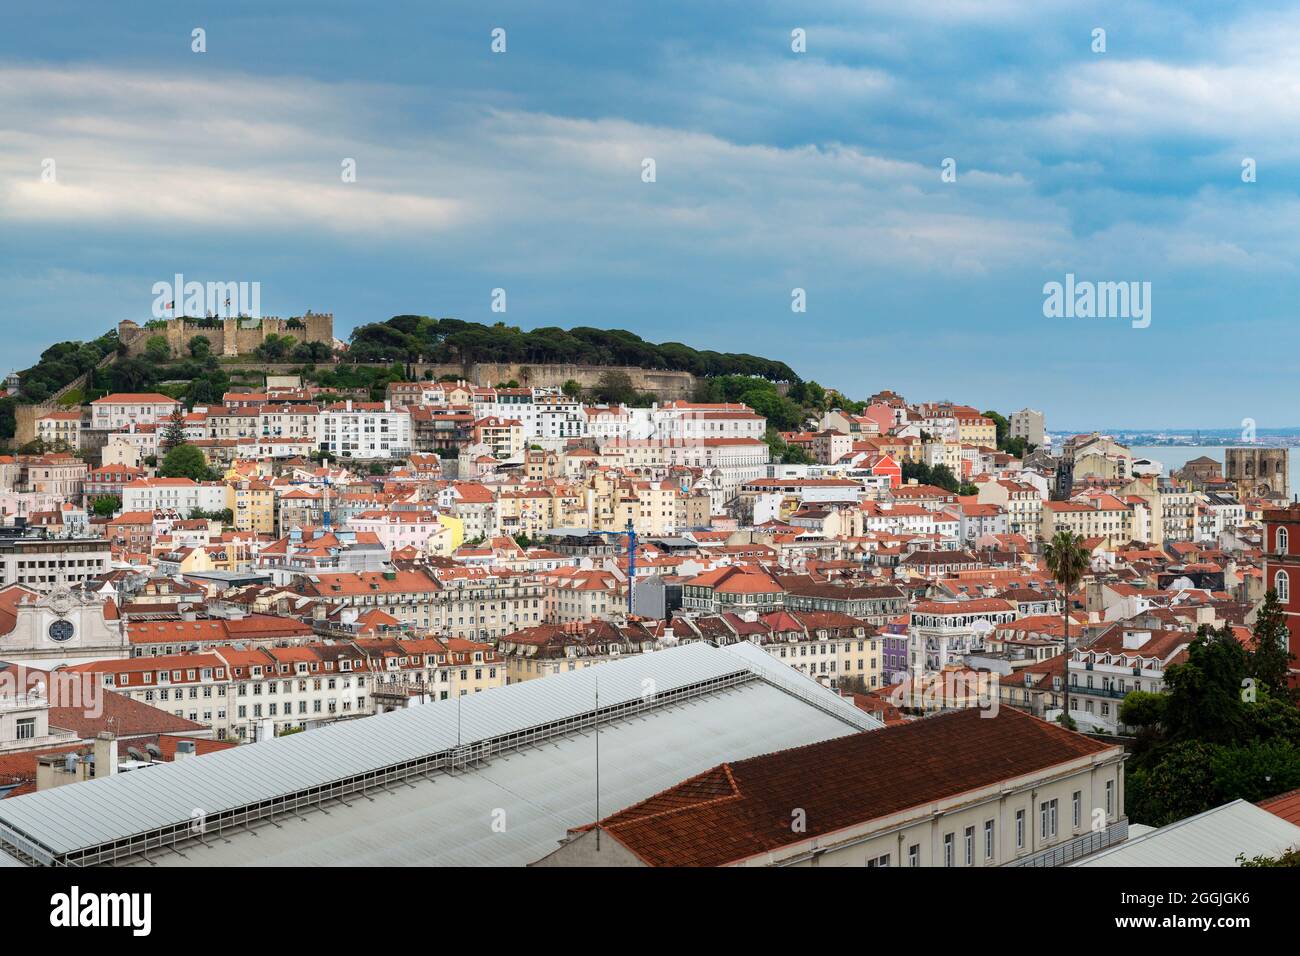 Beautiful view of the downtown of the city of Lisbon from the Sao Pedro de Alcantara viewpoint, with the Pombaline downtown and the Sao Jorge Castle. Stock Photo